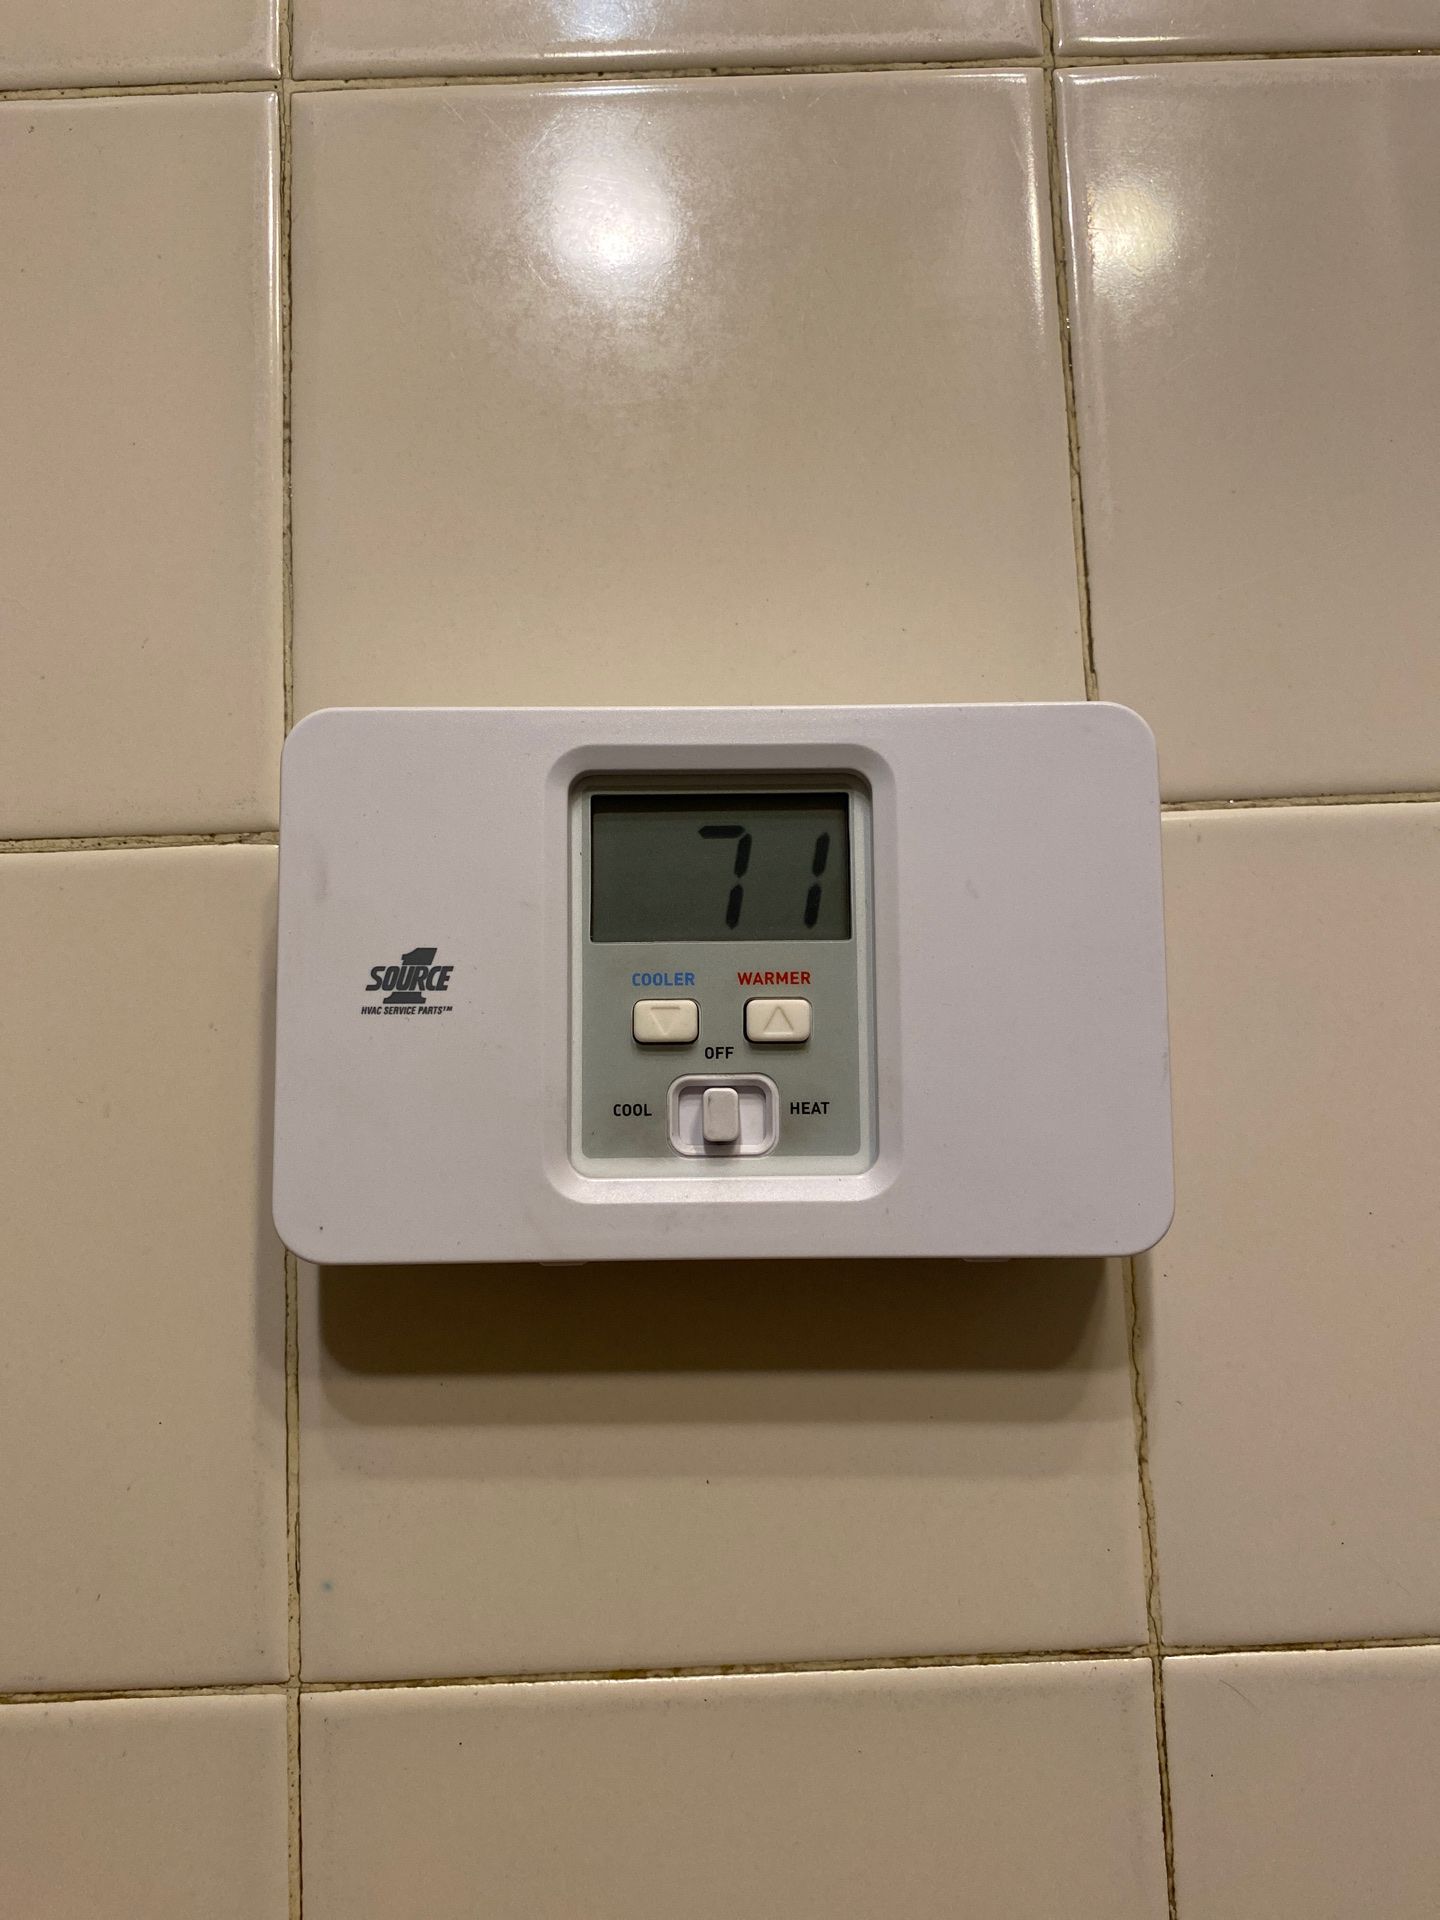 Free Source-1 Thermostat